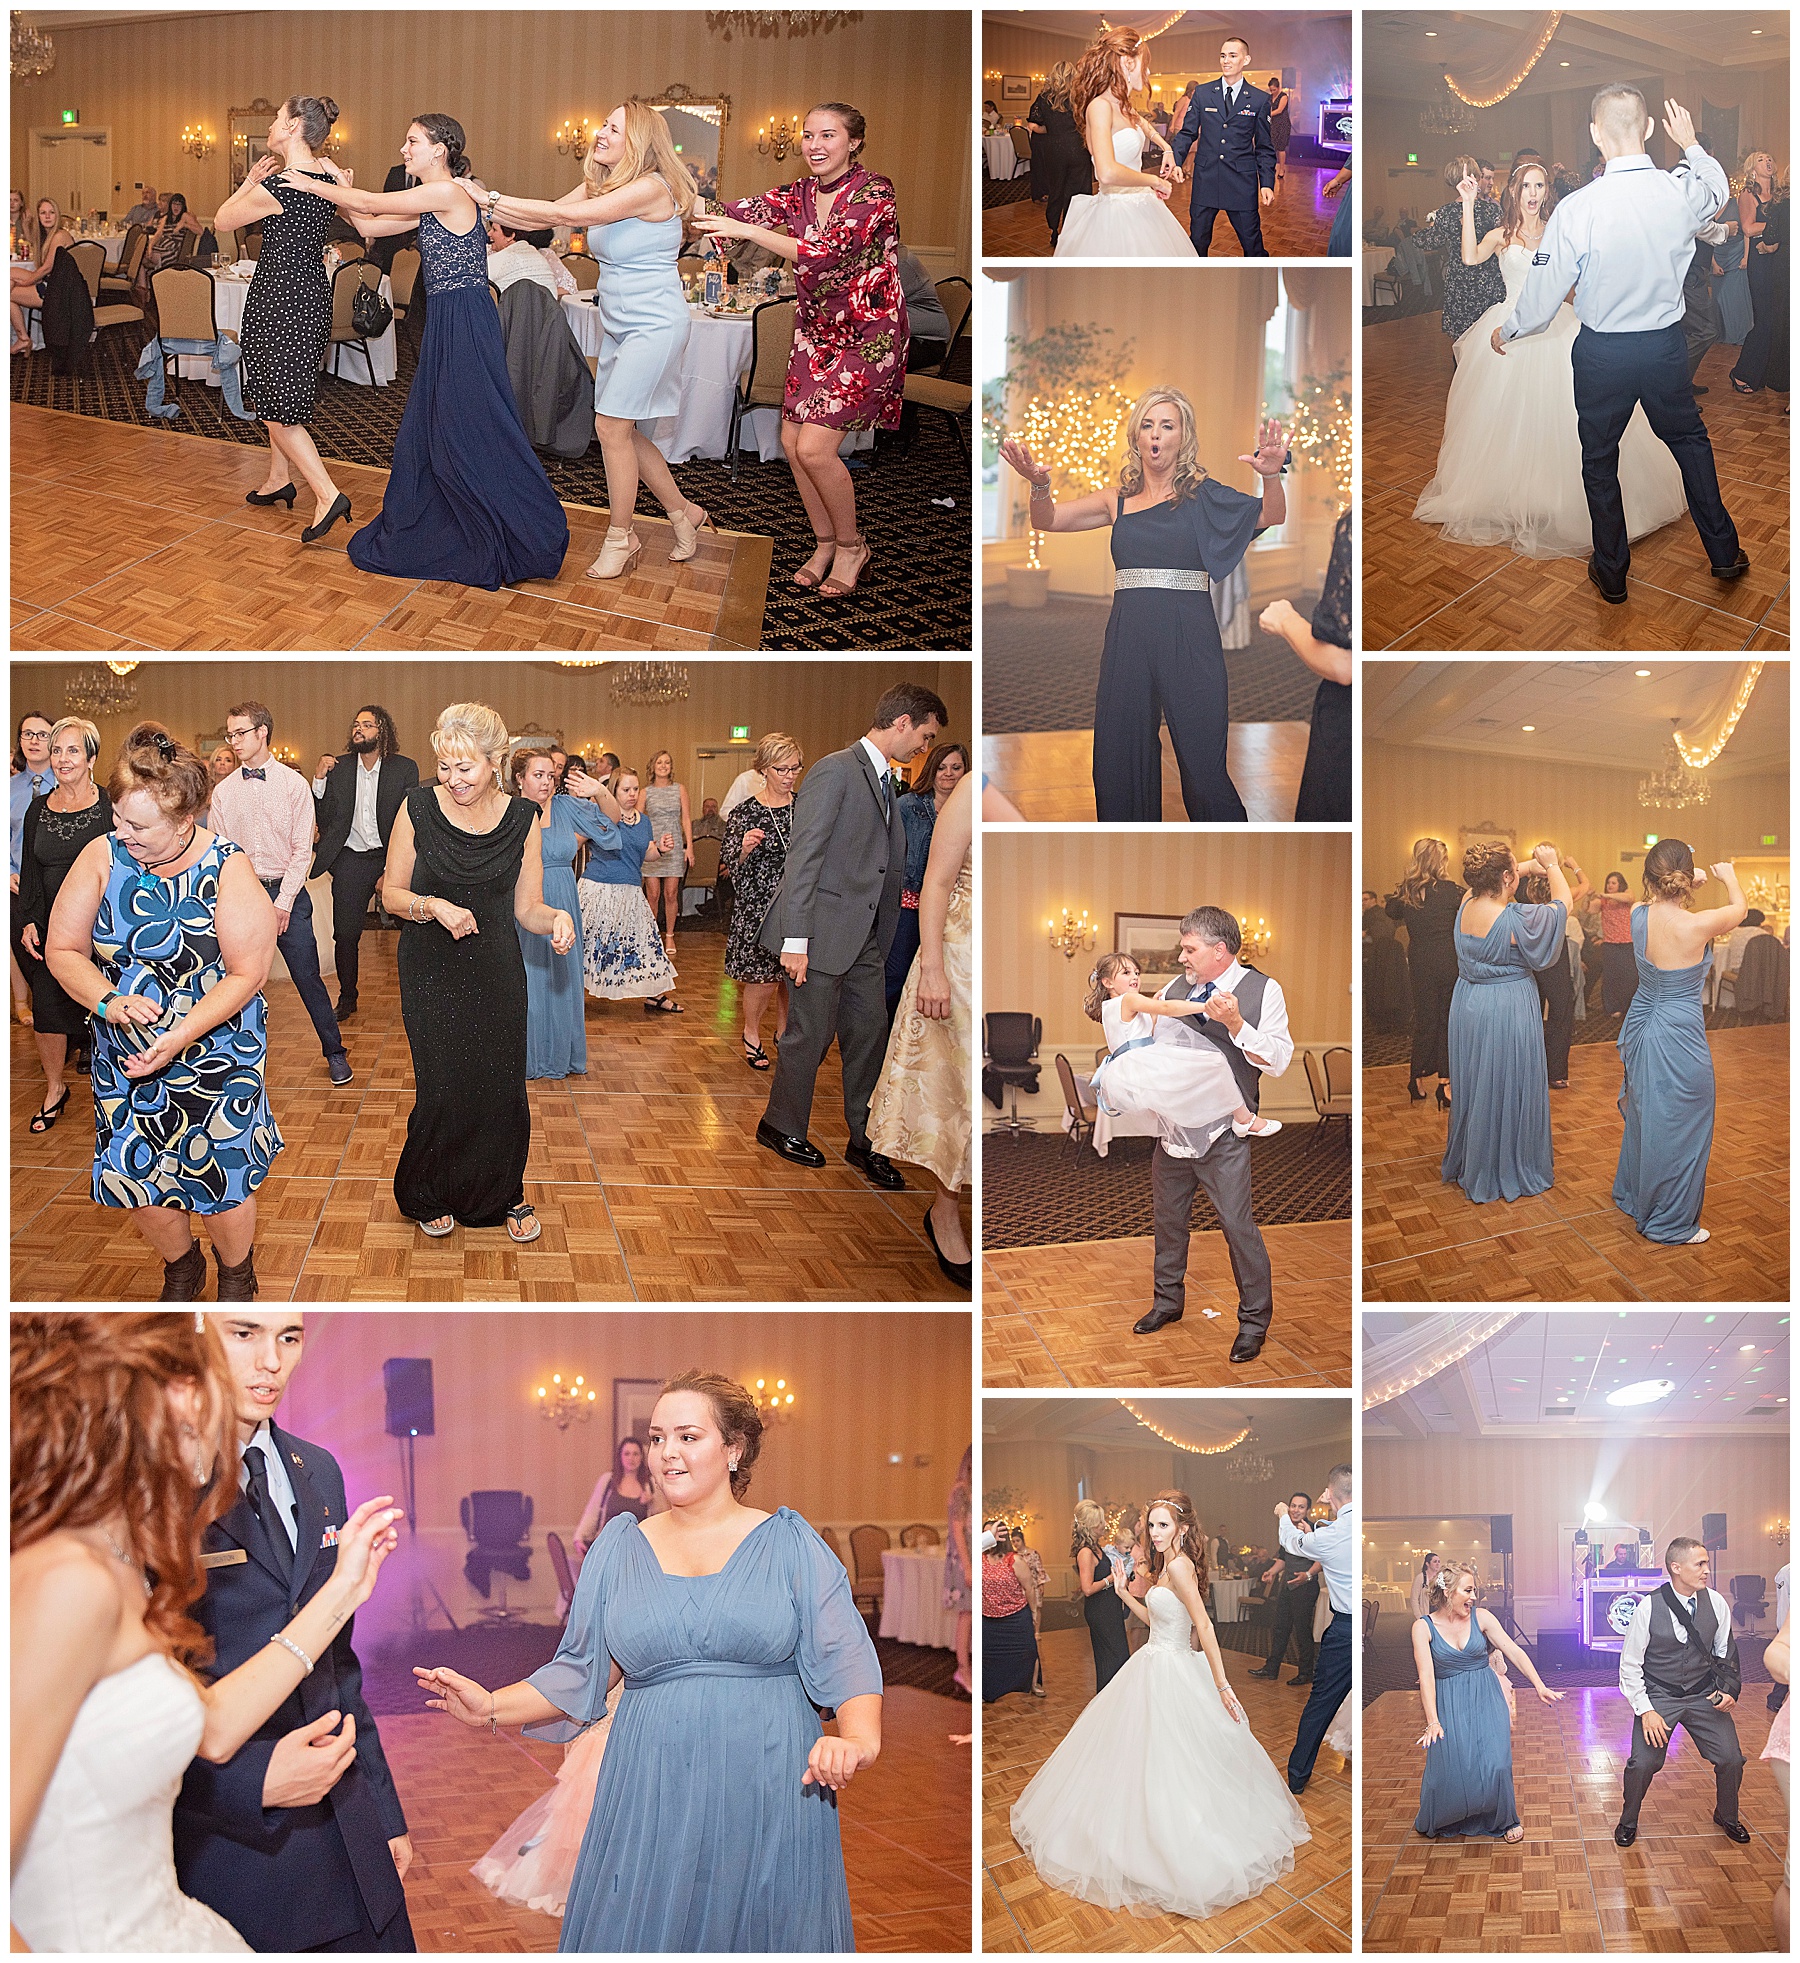 Wedding Guests Dancing at the Outdoor Country Club